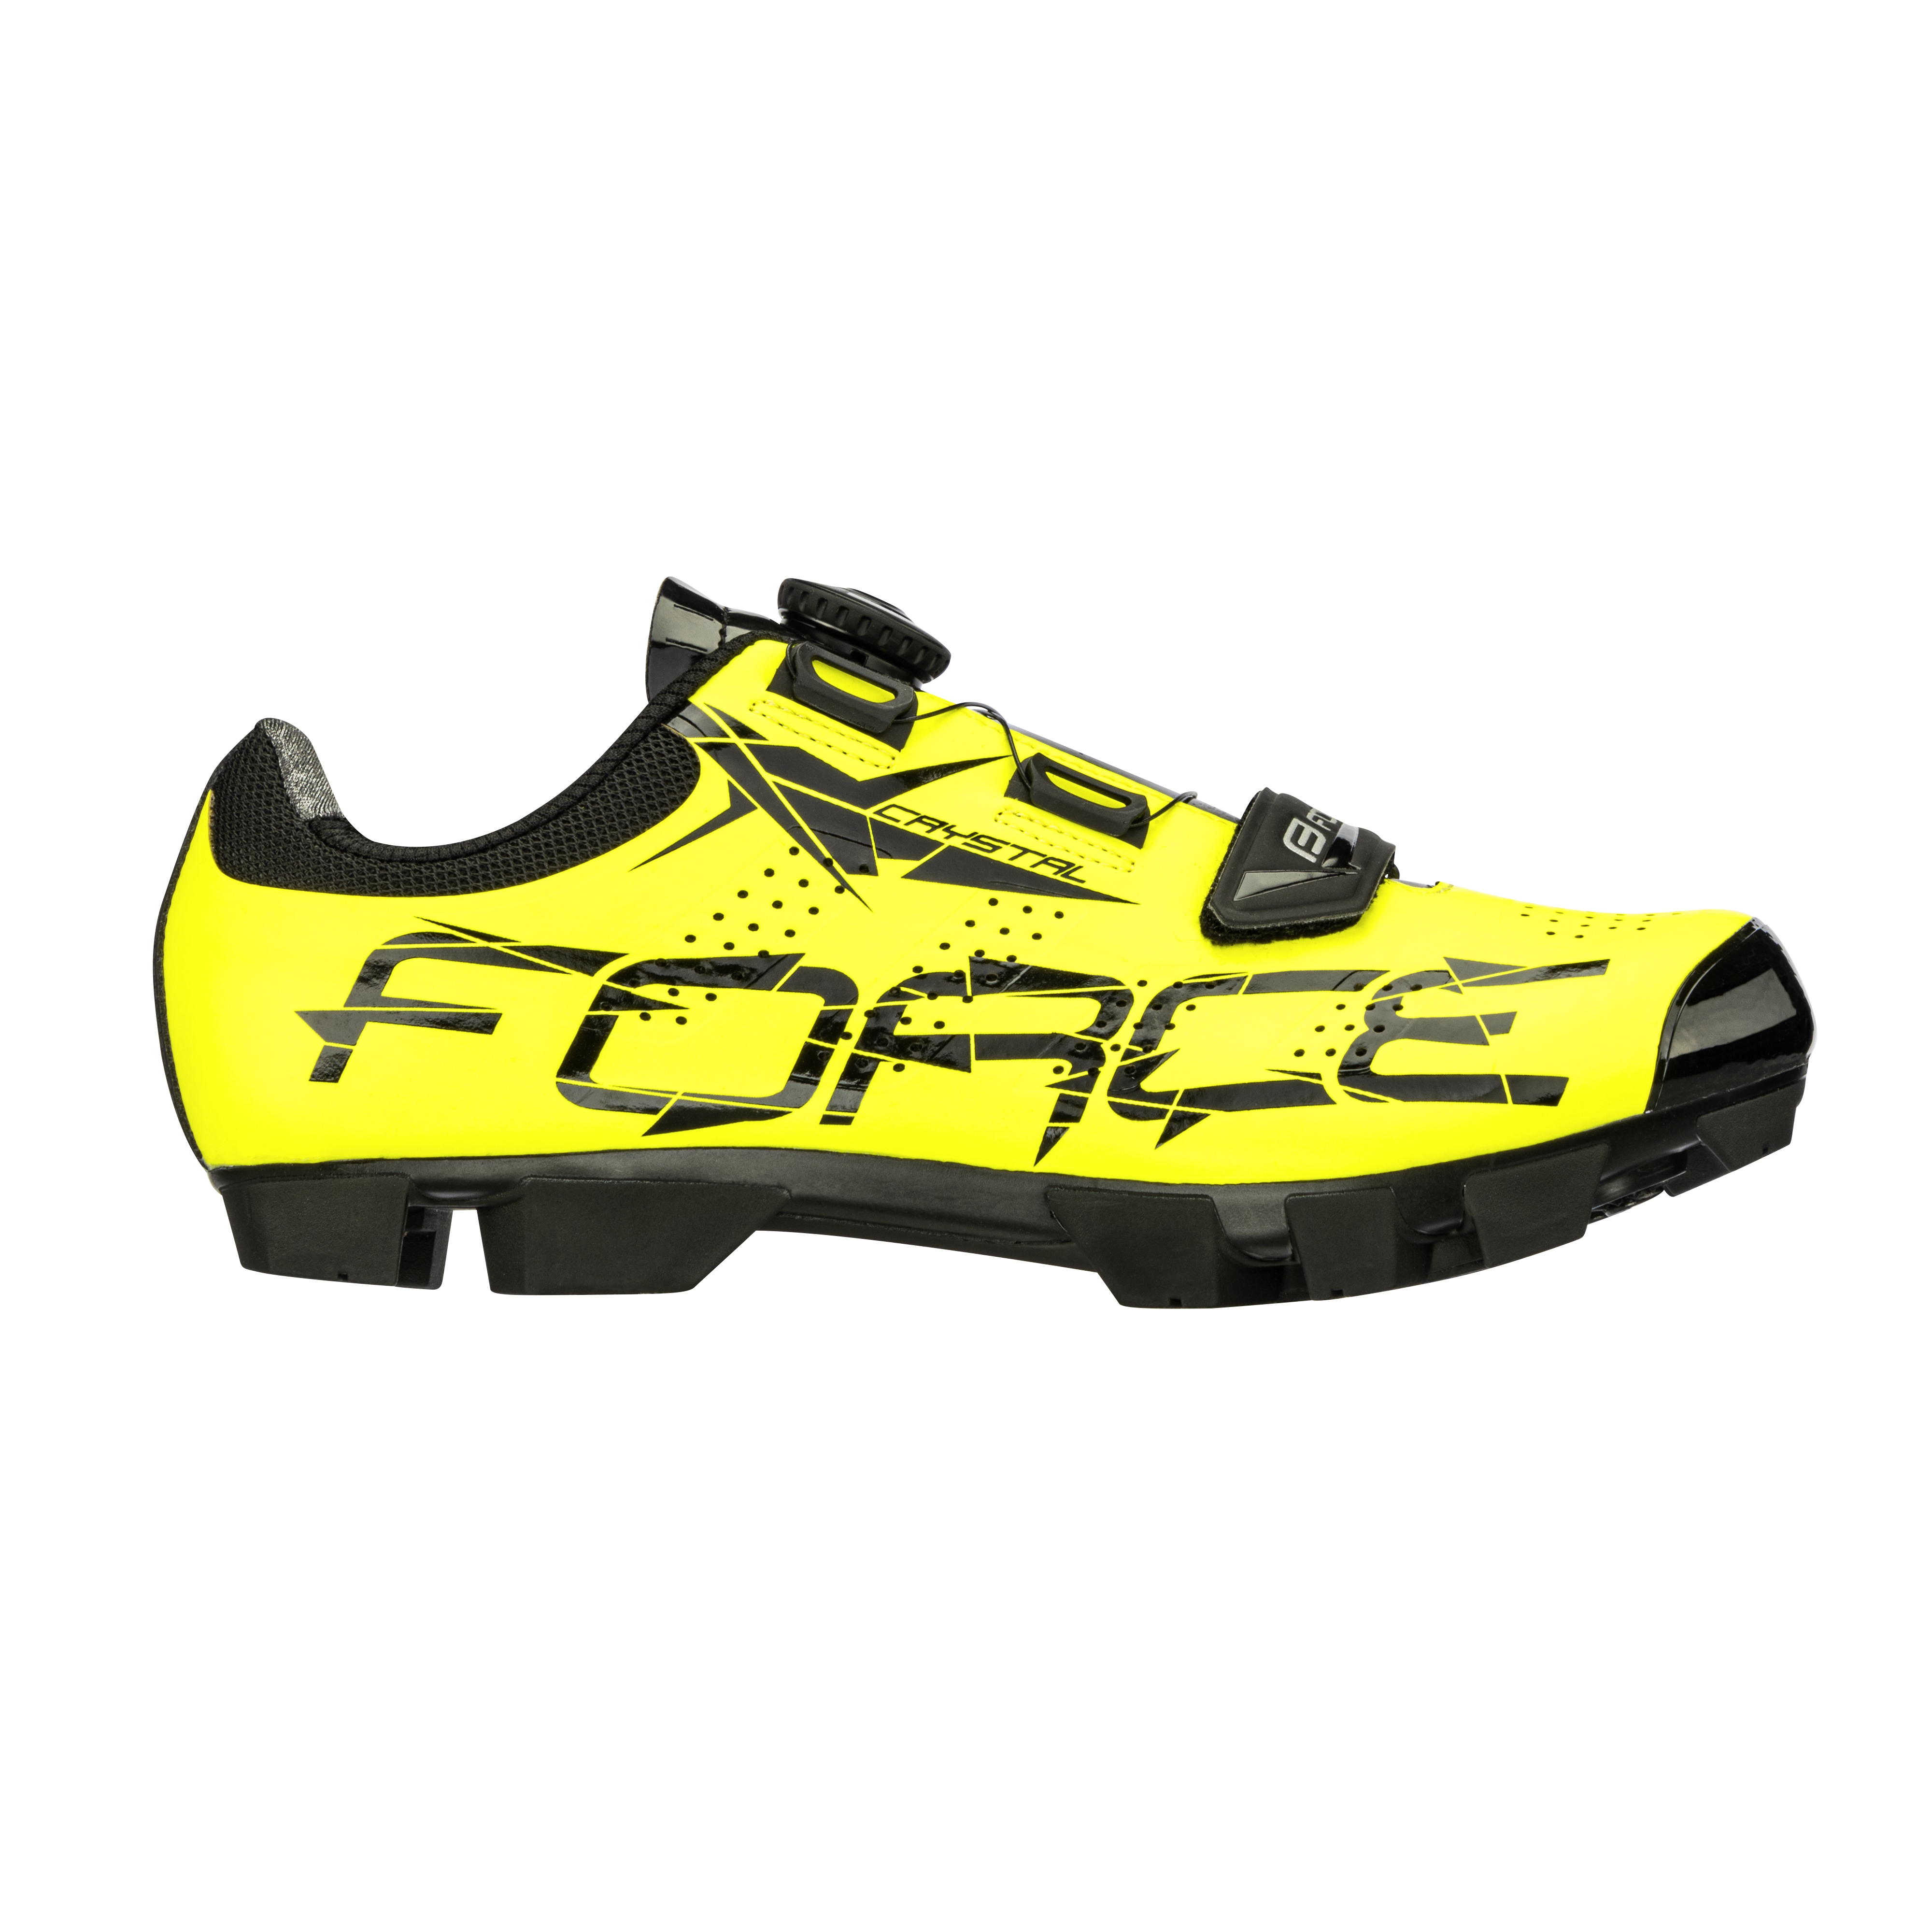 tretry FORCE MTB CRYSTAL, fluo 44